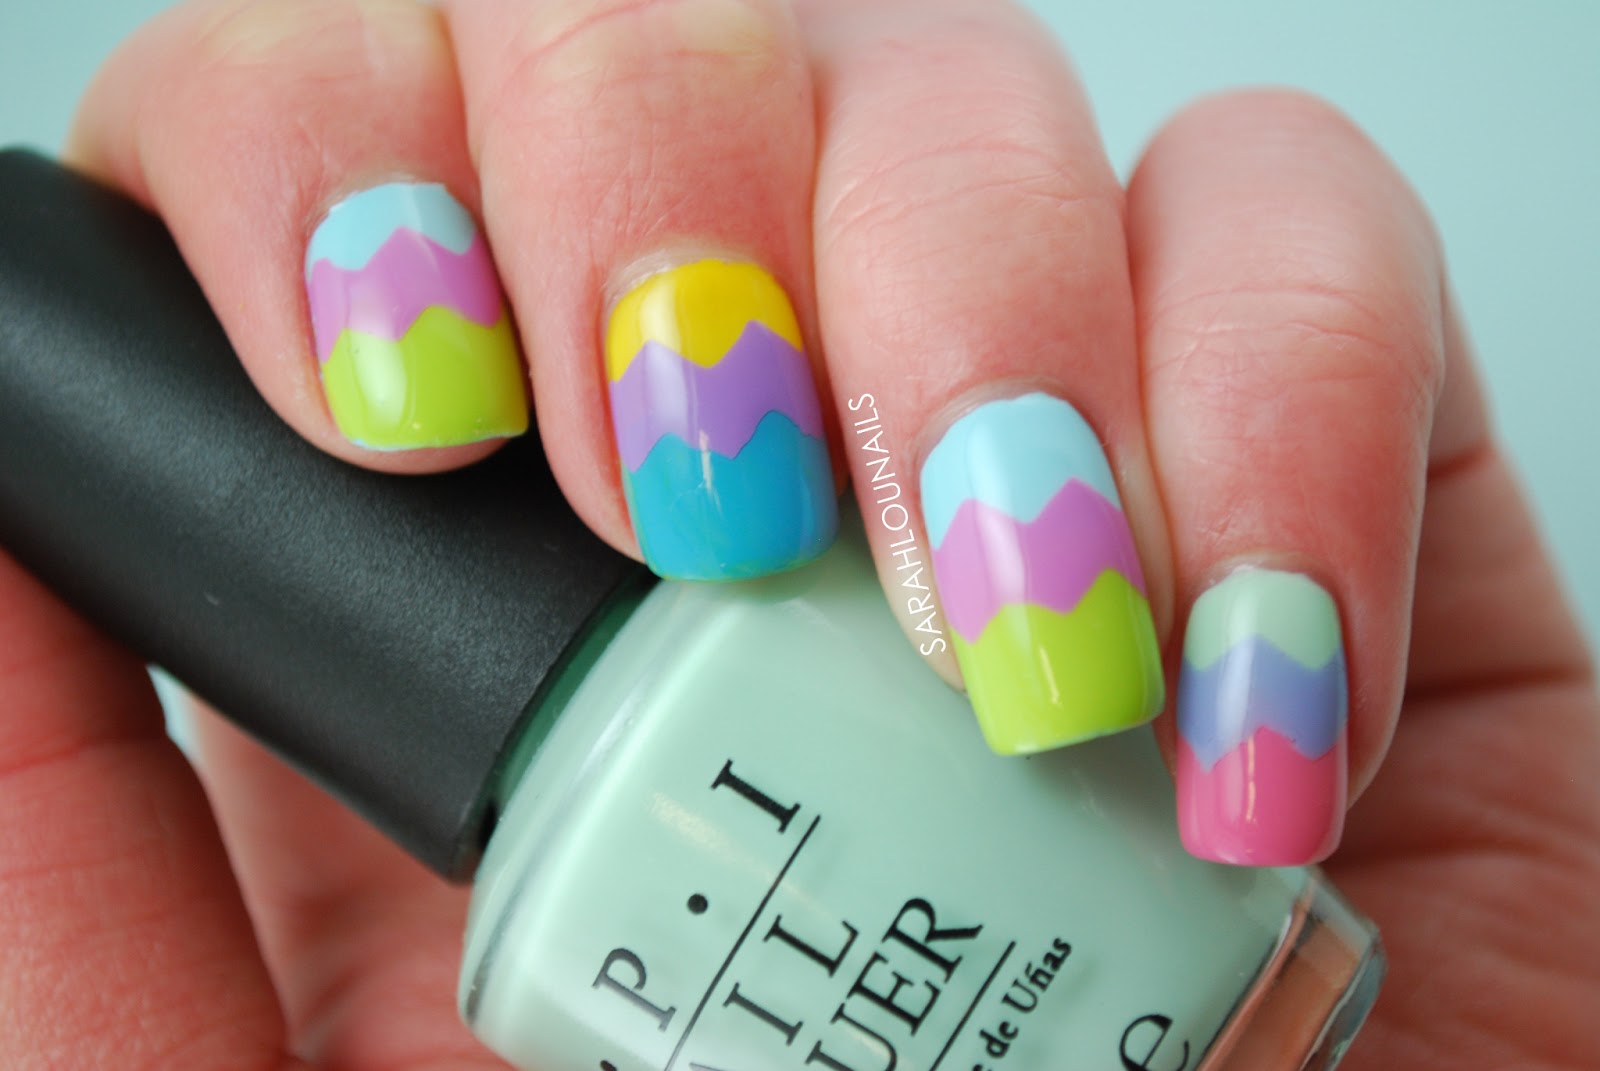 3. "Easy Easter Chick Nails" - wide 8